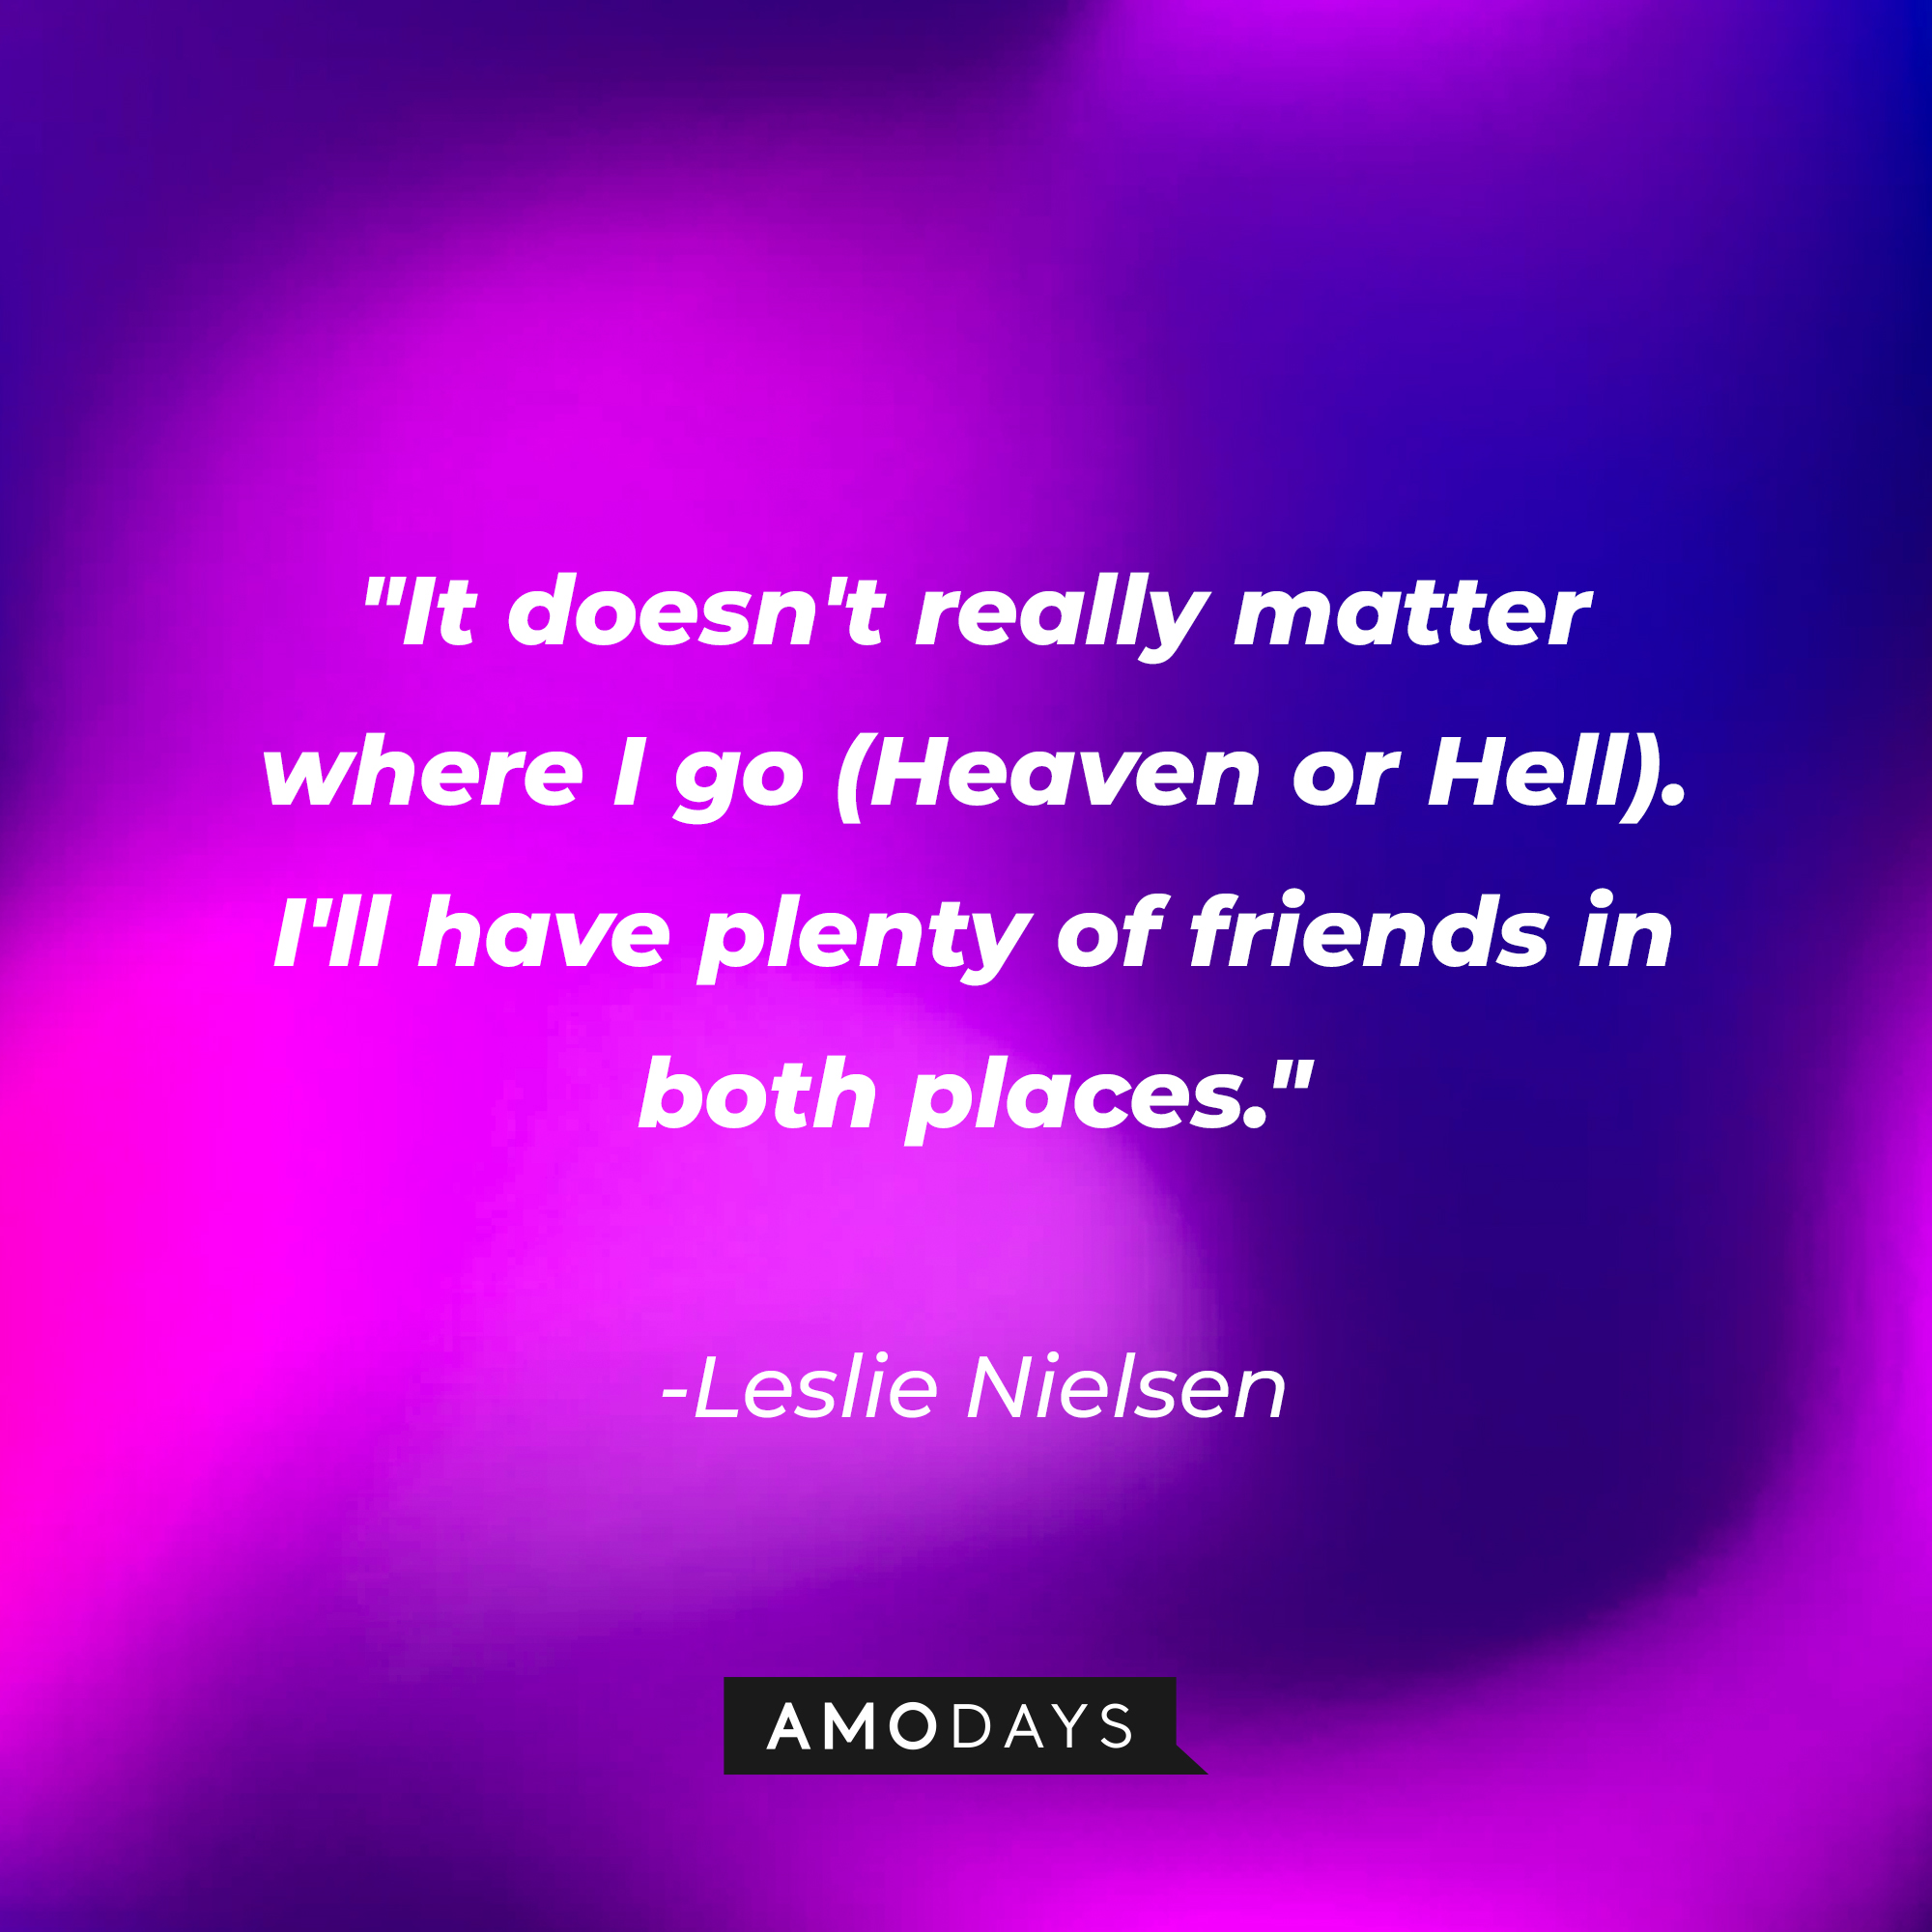 Leslie Nielsen's quote: "It doesn't really matter where I go [Heaven or Hell]. I'll have plenty of friends in both places." | Source: Amodays